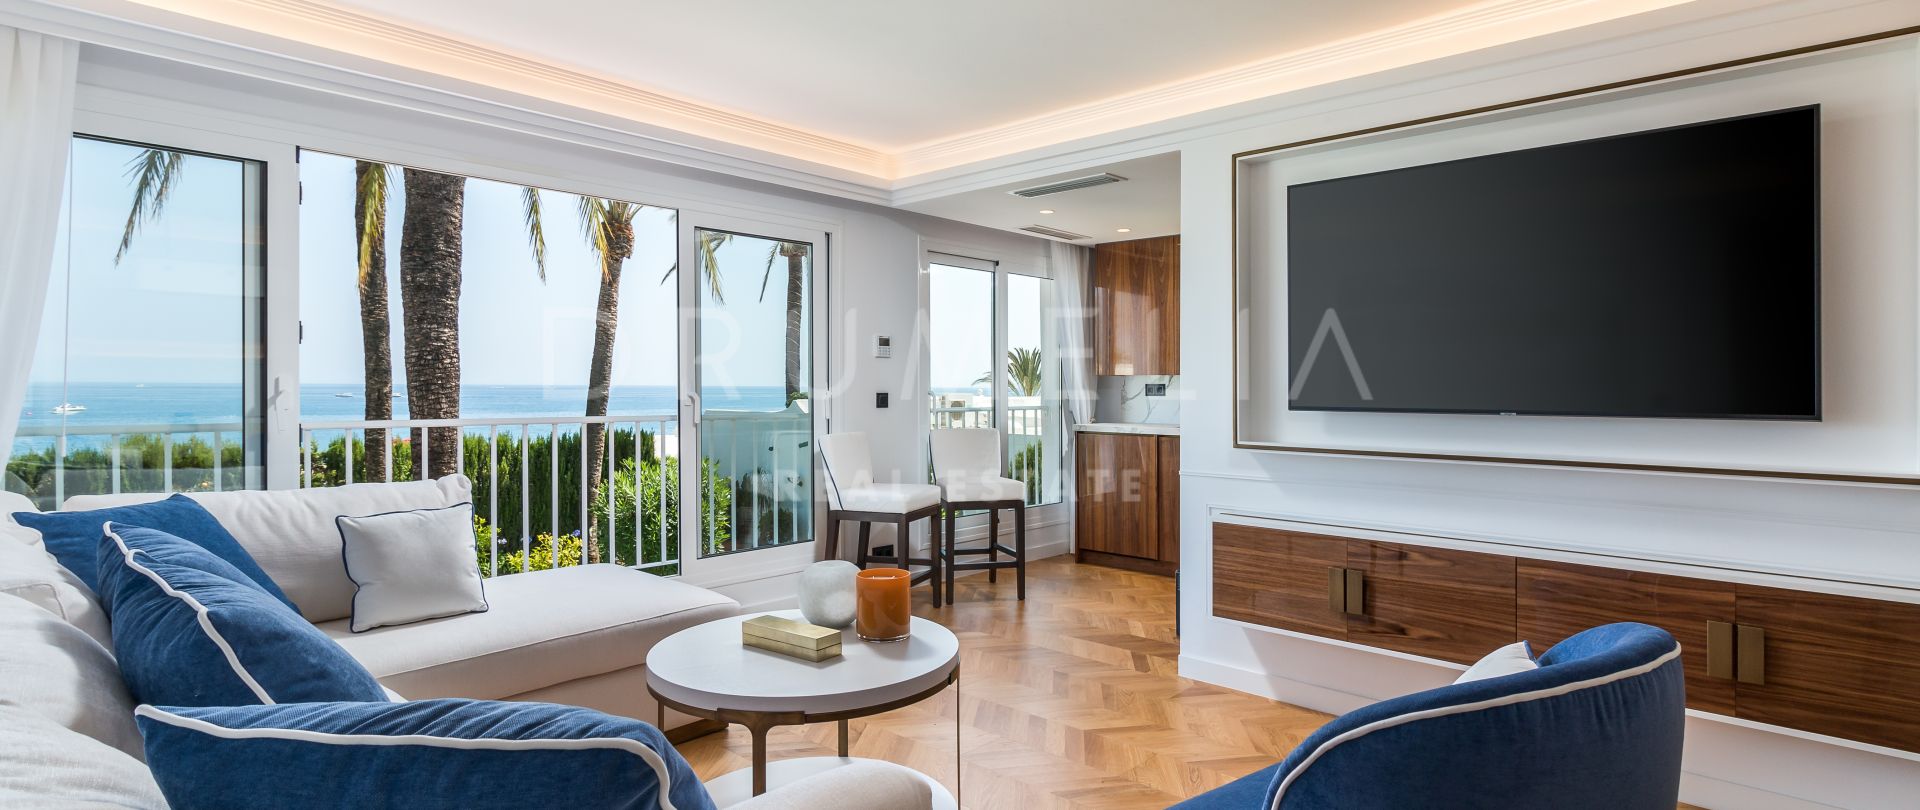 Stunning Renovated Beachfront Town House for sale in High-end El Oasis Club, Marbella’s Golden Mile